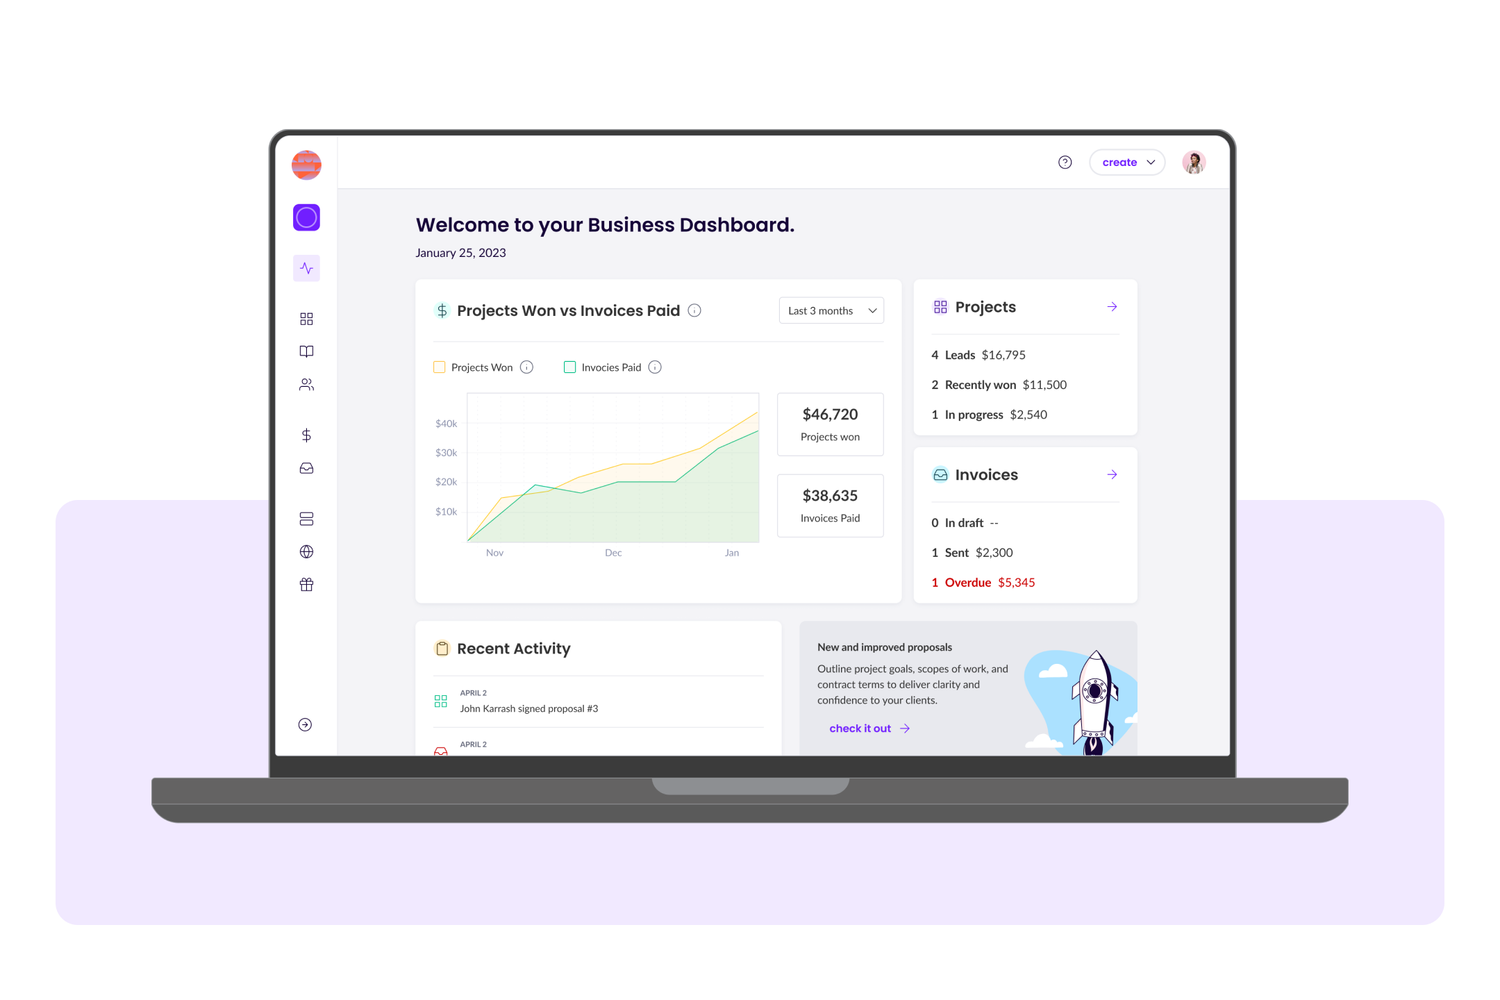 Wethos Software - Wethos' business dashboard gives you a quick overview of how your business is performing, areas for improvement, and any items that need your urgent attention.